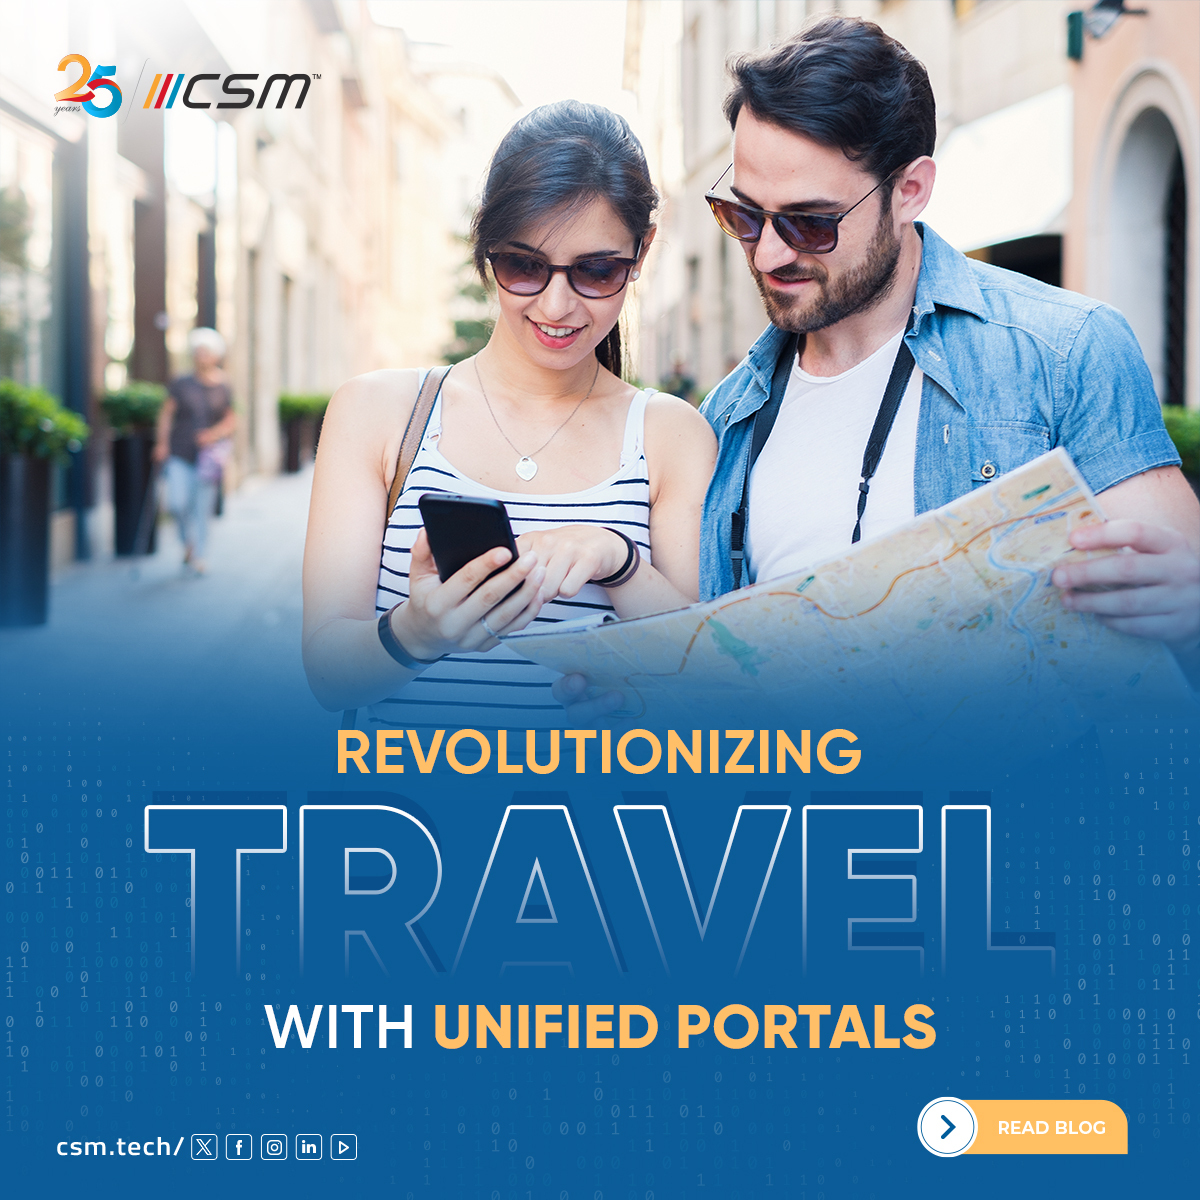 Our unified travel portal crafts bespoke adventures for the refined traveler. Customize, explore, and experience the extraordinary.  

👉Read Blog: bit.ly/3Hbqbik 

#CSMTech #Tourism #SmartTourism #DigitalExploration